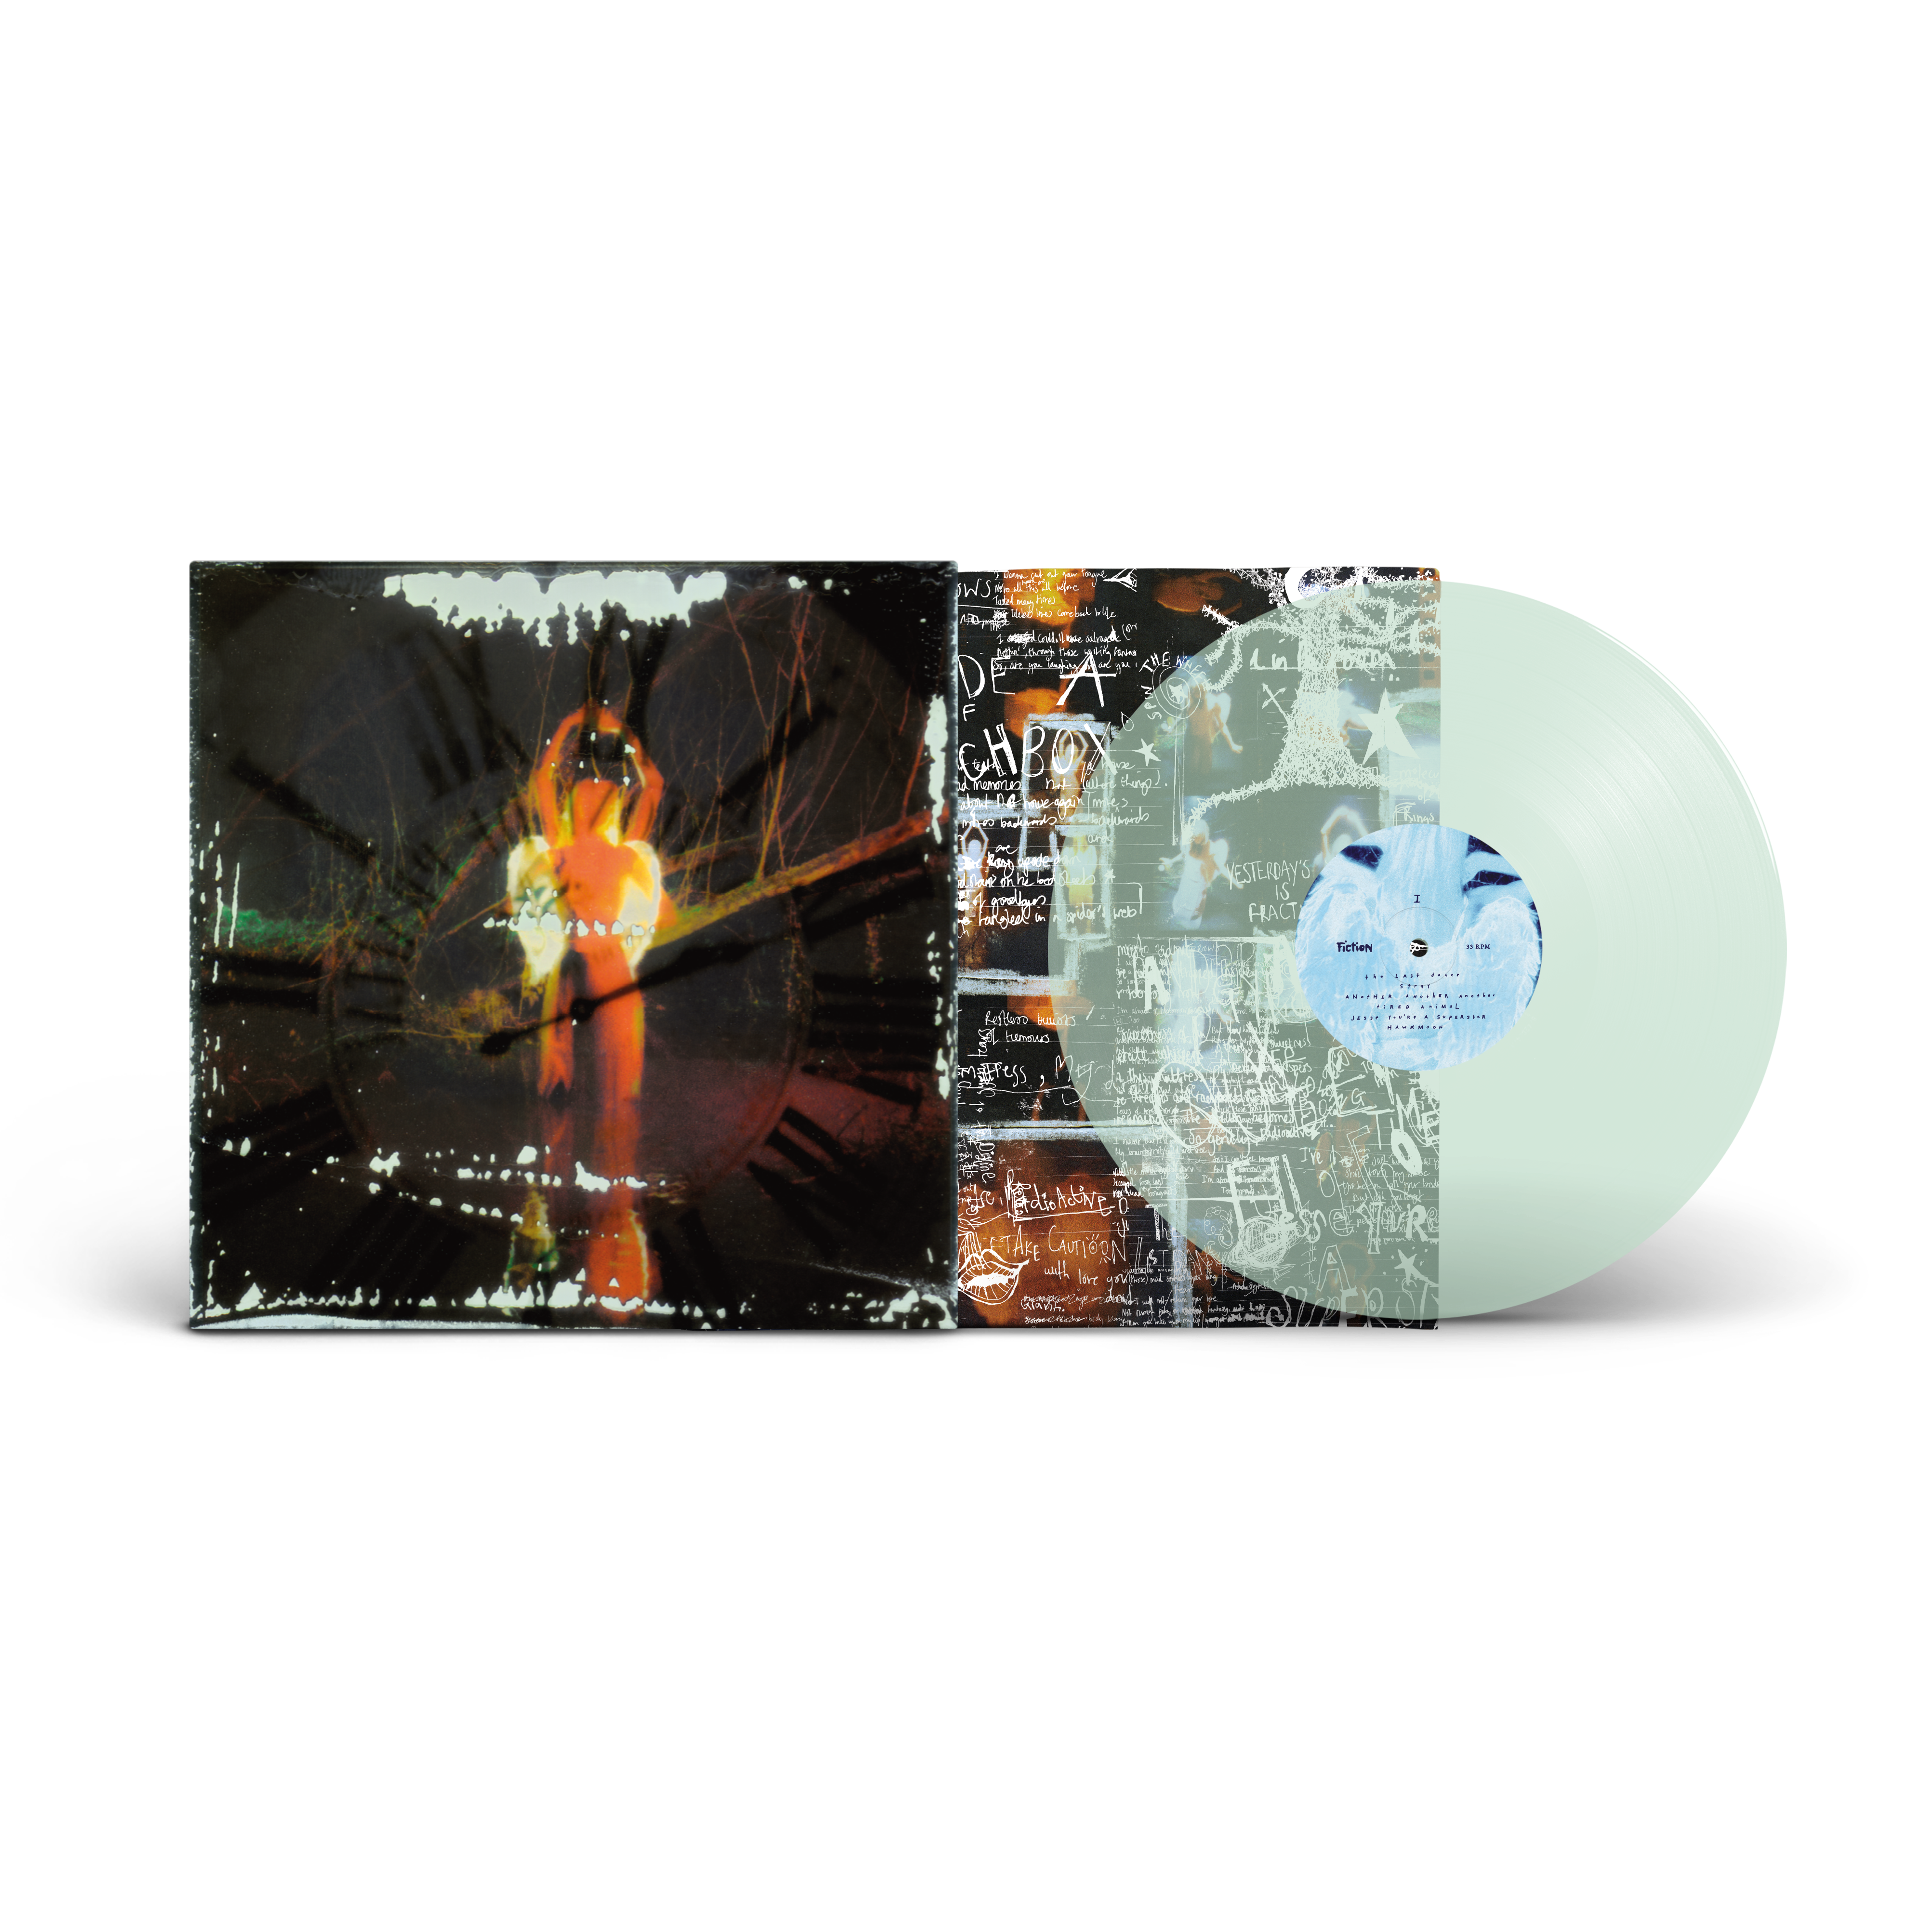 Afraid of Tomorrows: Limited Coke Bottle Clear Vinyl LP & Signed Print [Exclusive - 200 Available]